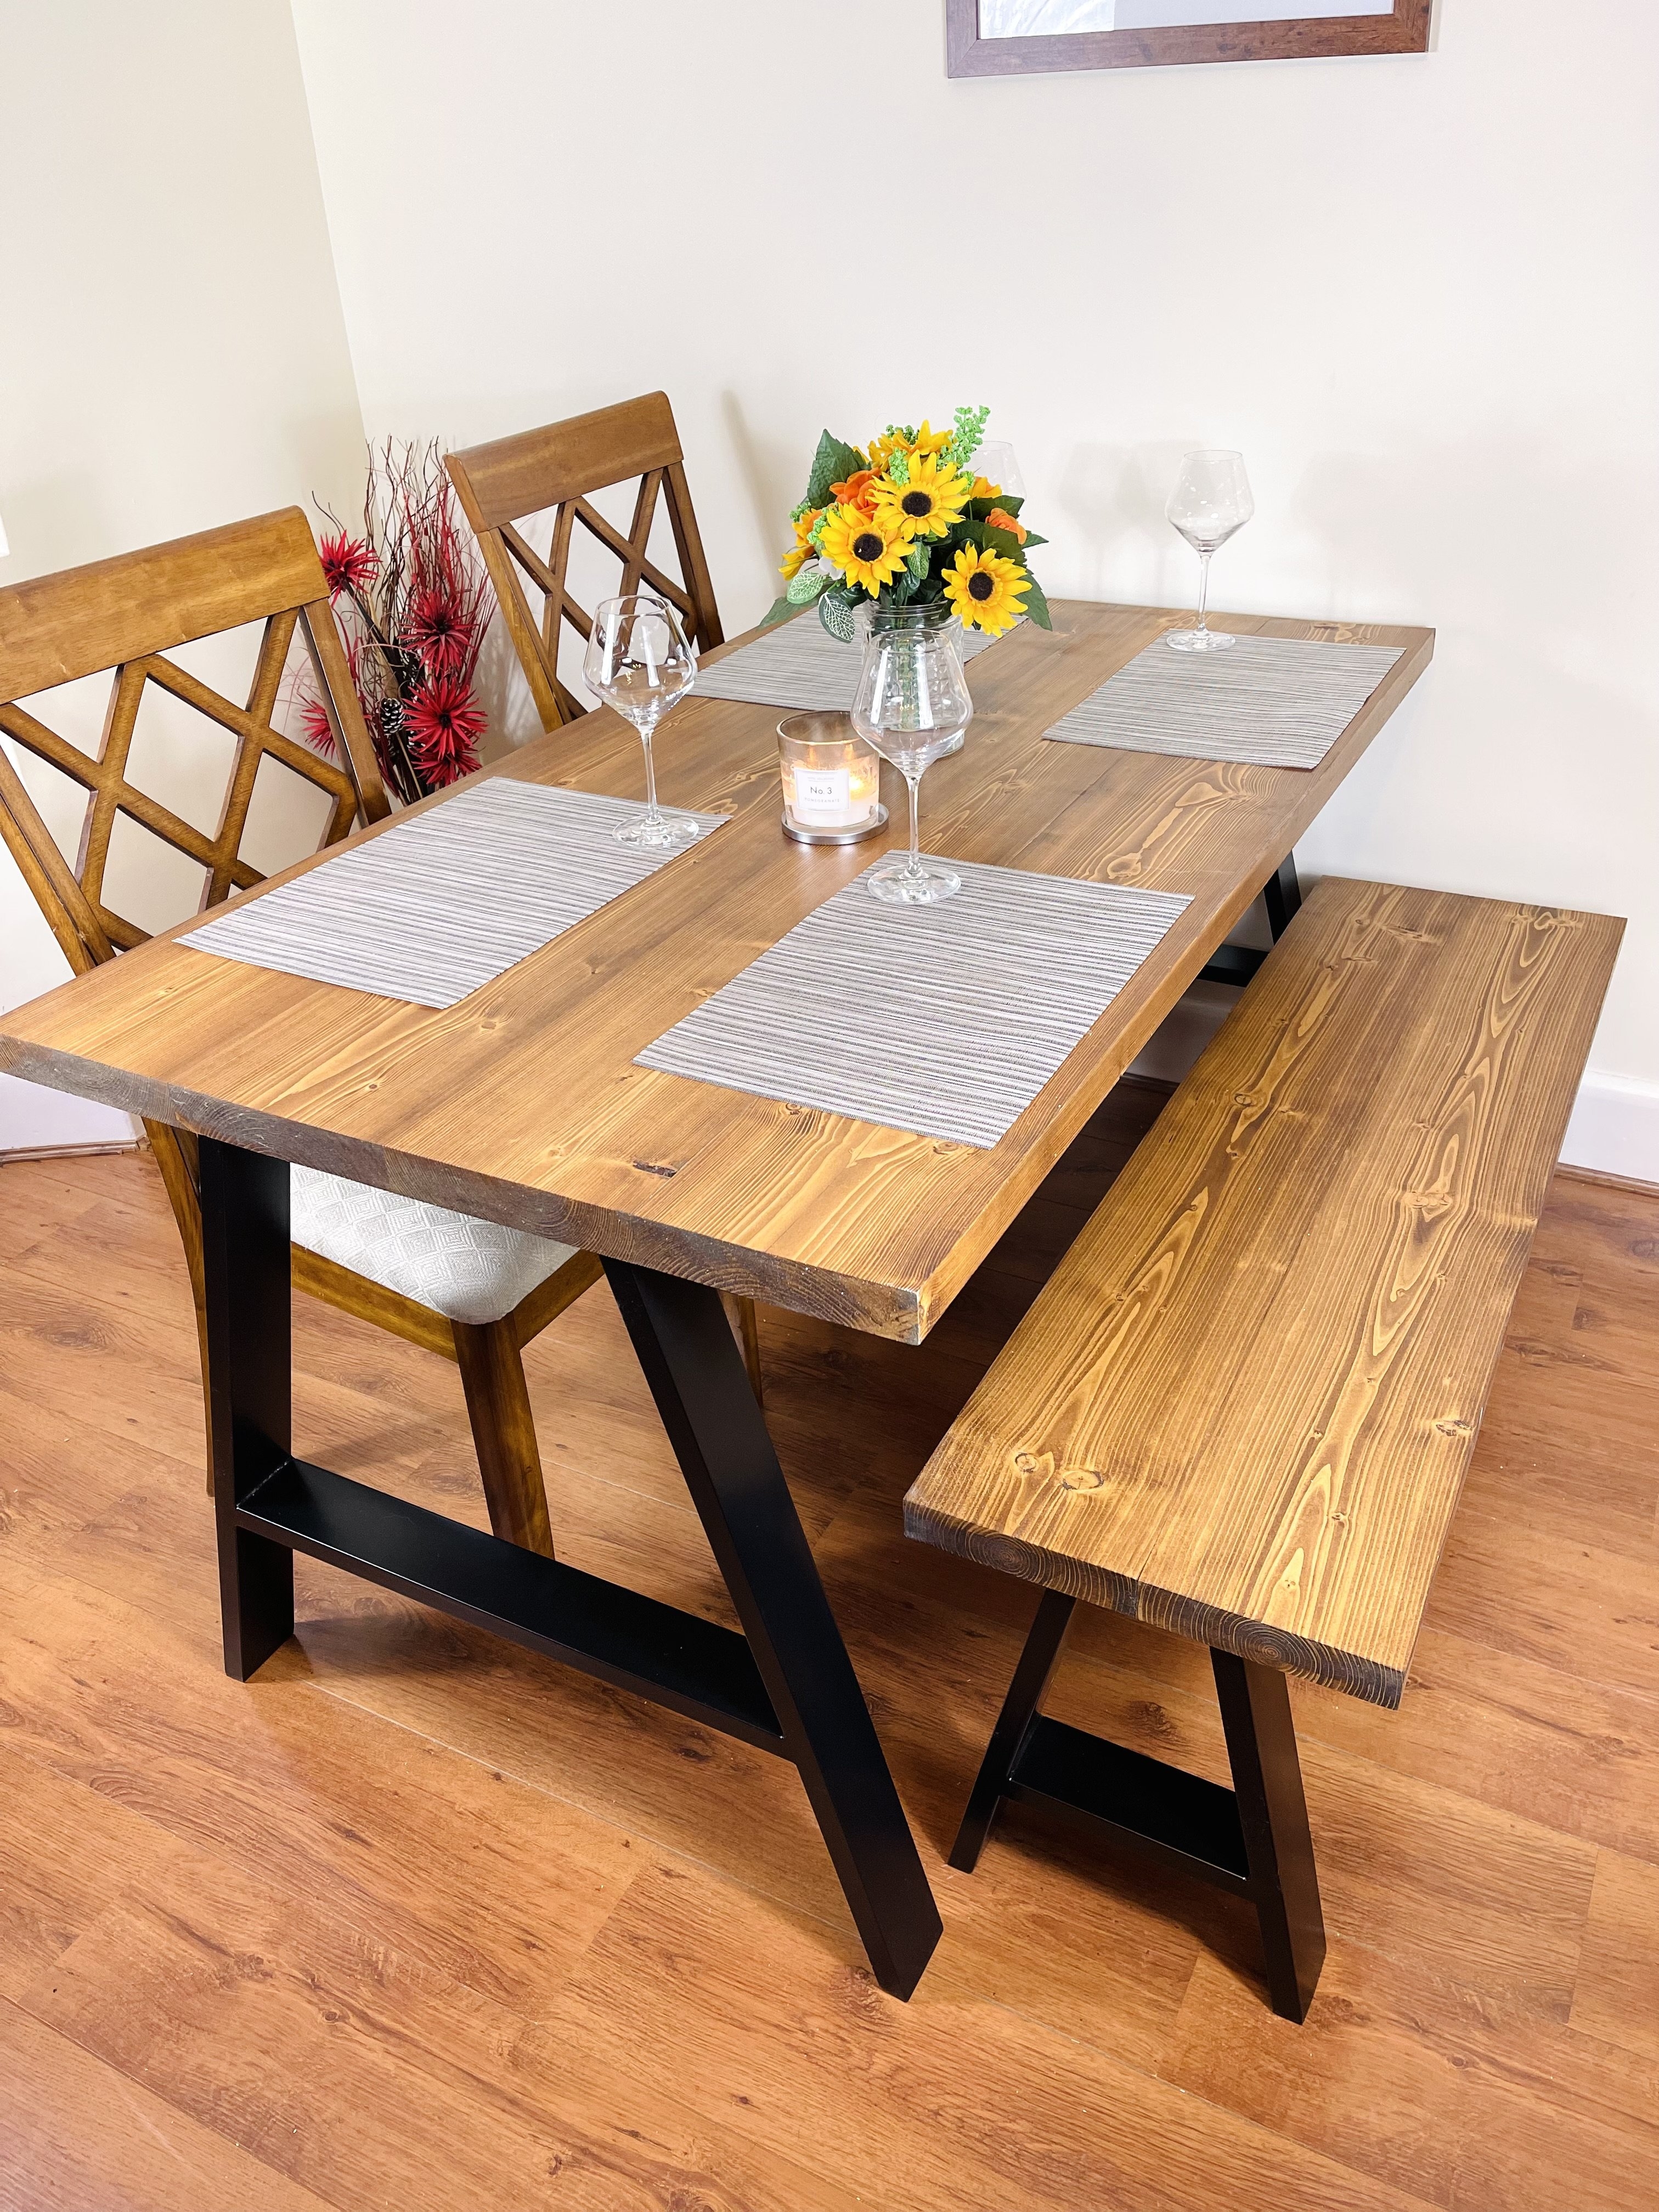 Dining Table & Bench Set with Steel A-Frame Legs – 180cm + 1 Bench